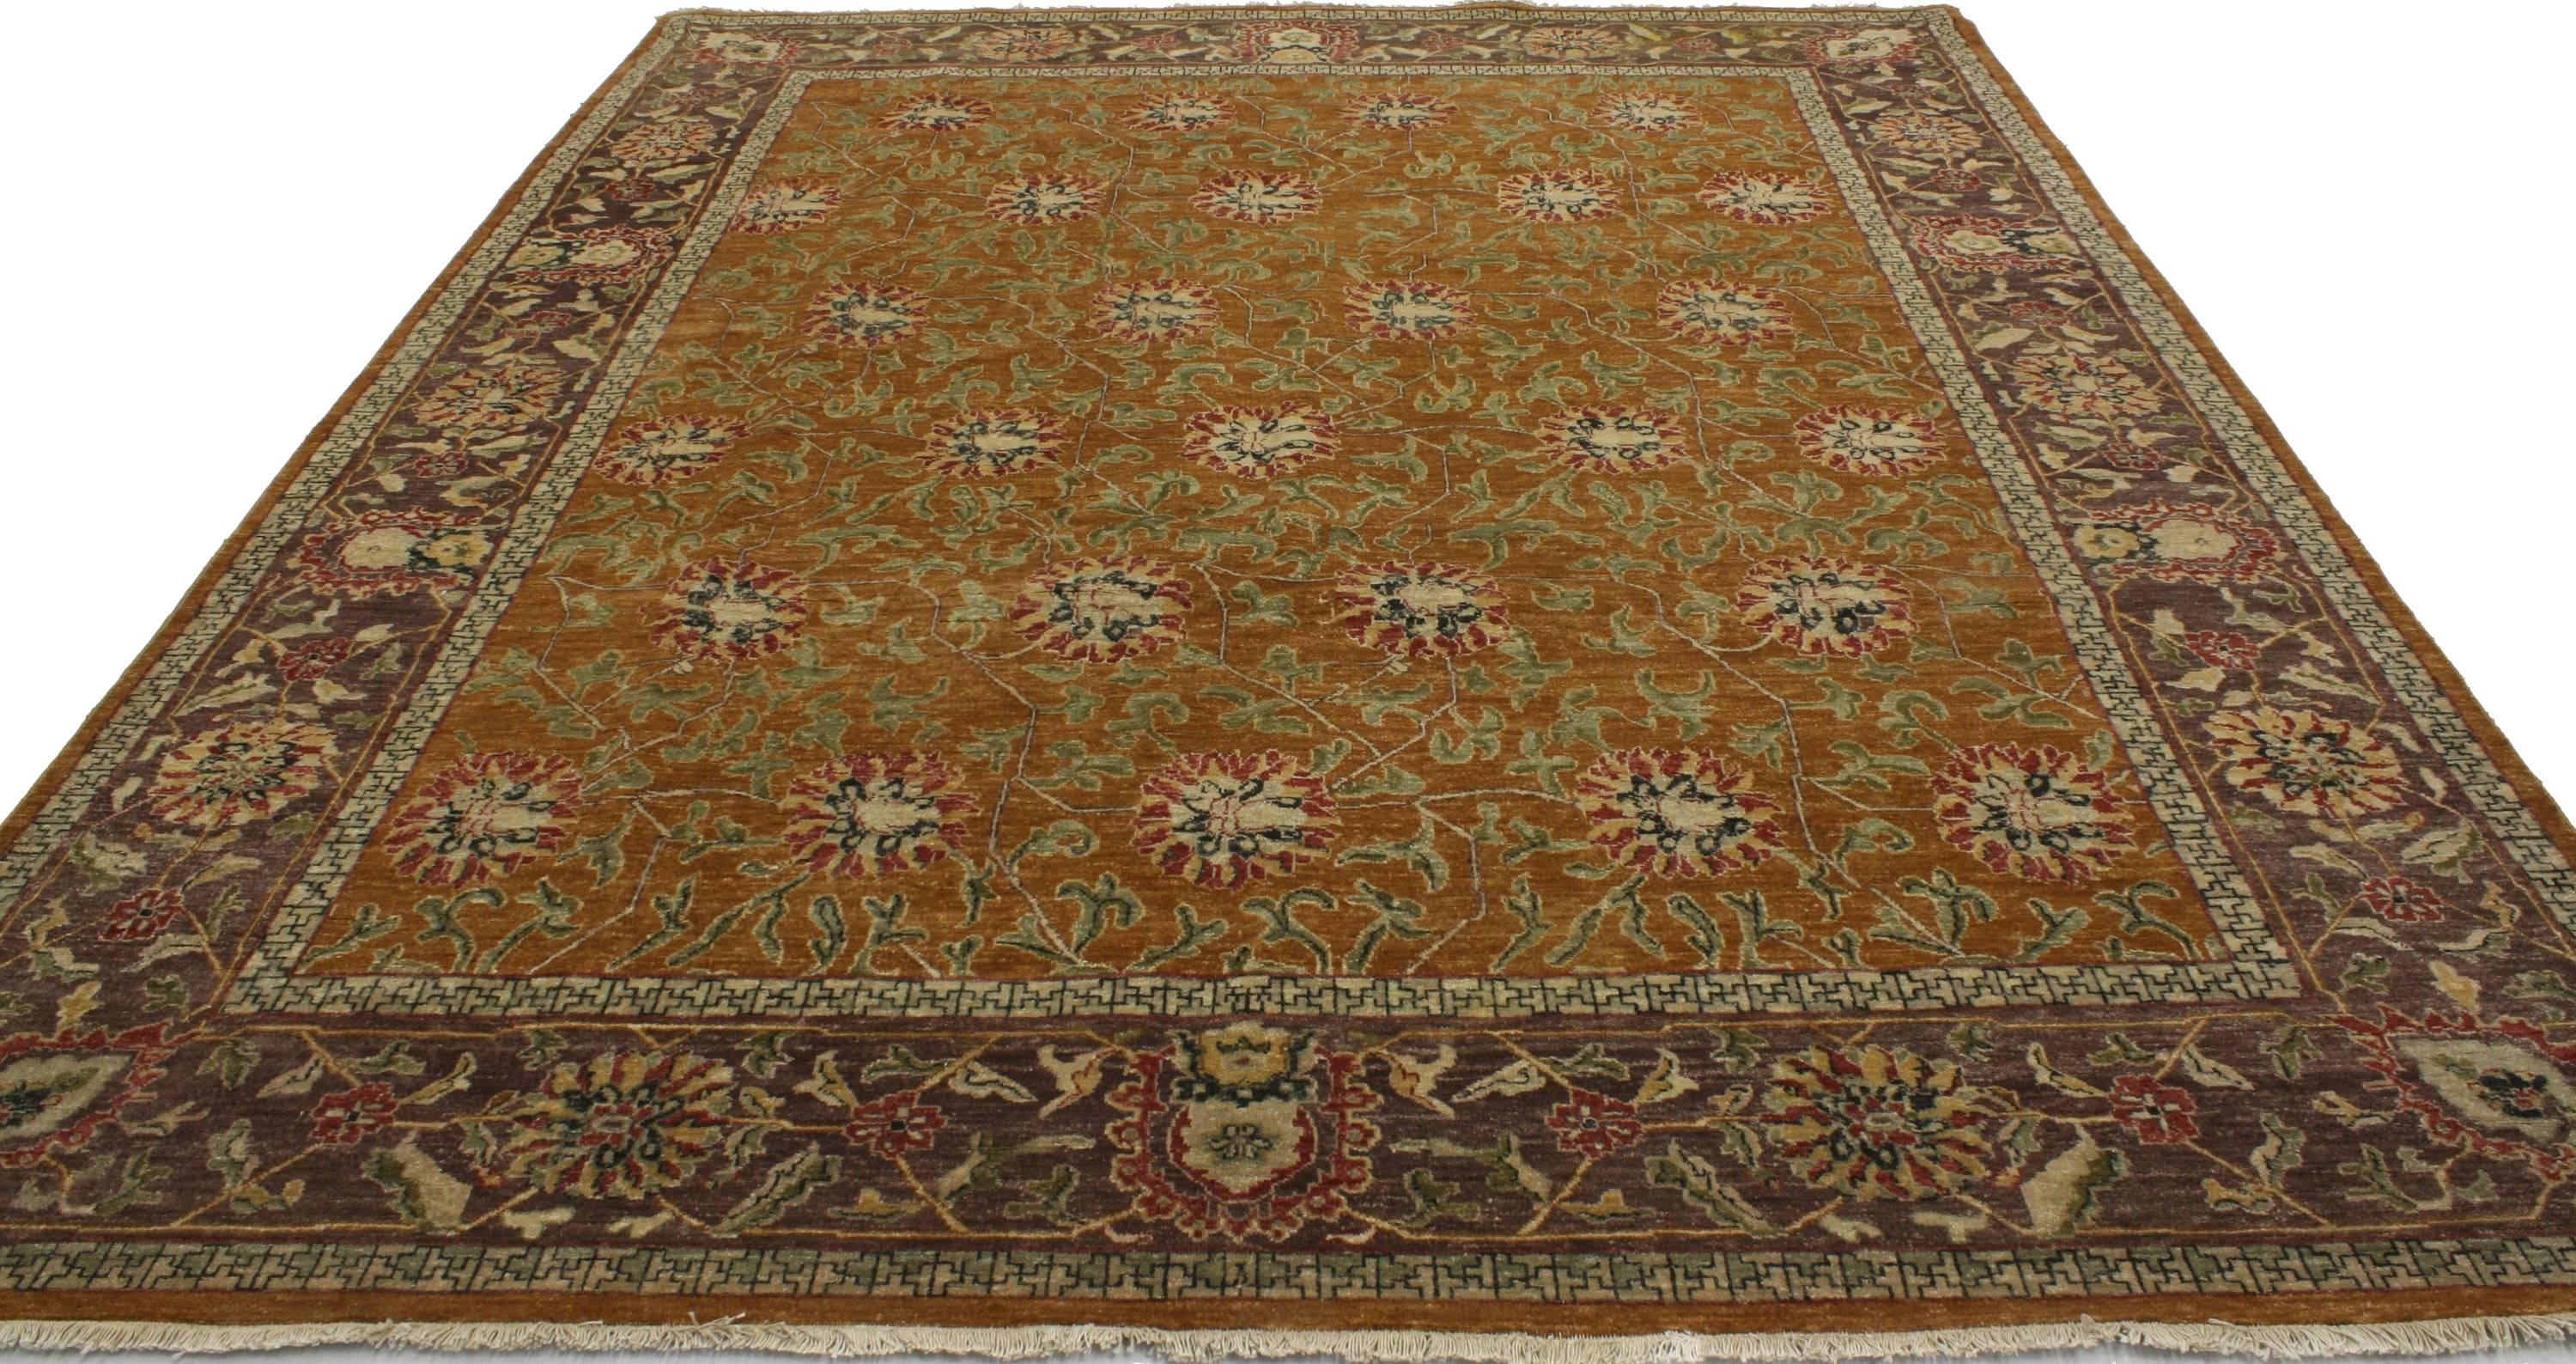 30290 New Contemporary Indian Area Rug with Rustic Arts and Crafts Style. The architectural elements of naturalistic forms combined with Arts and Crafts style, this hand-knotted wool contemporary Indian area rug draws inspiration from William